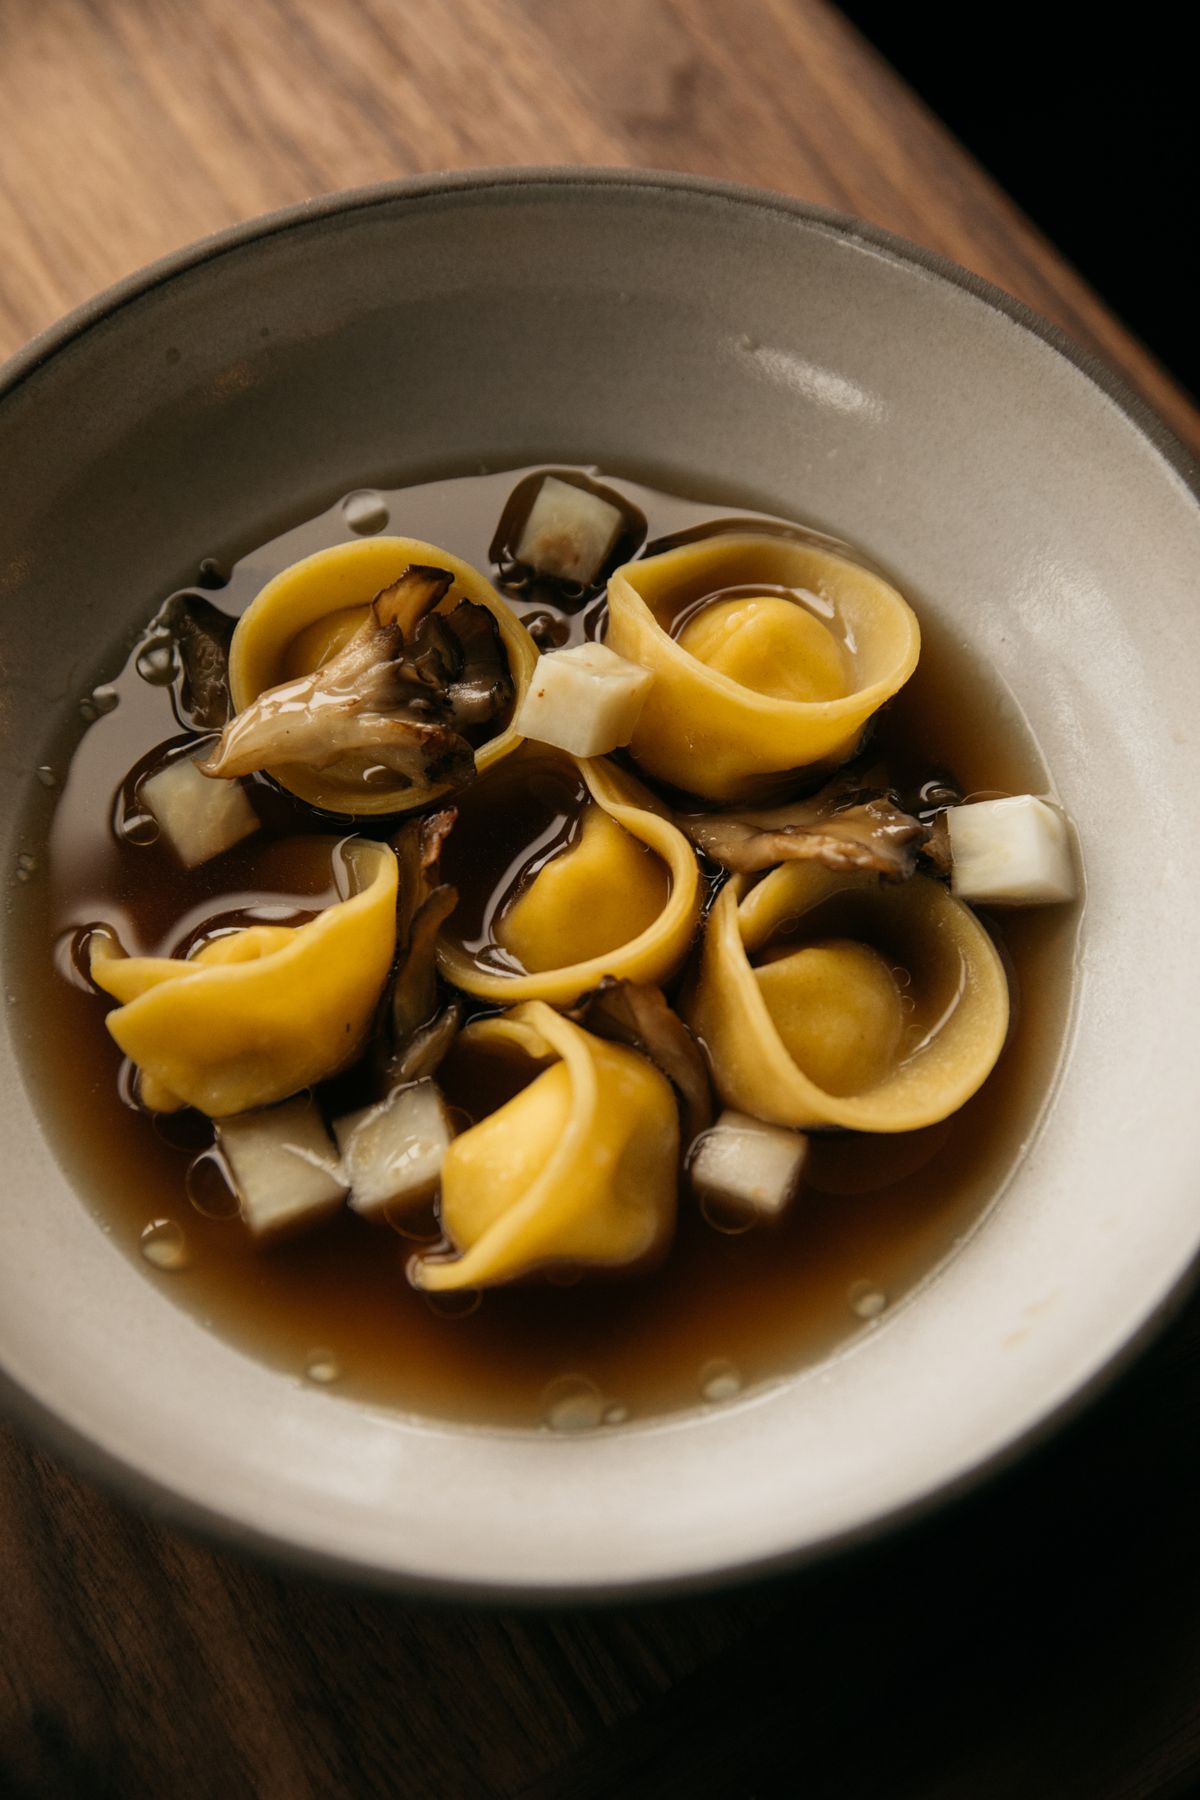 Yellow tortellini floating in brown acorn broth in a beige clay bowl on a wooden table.